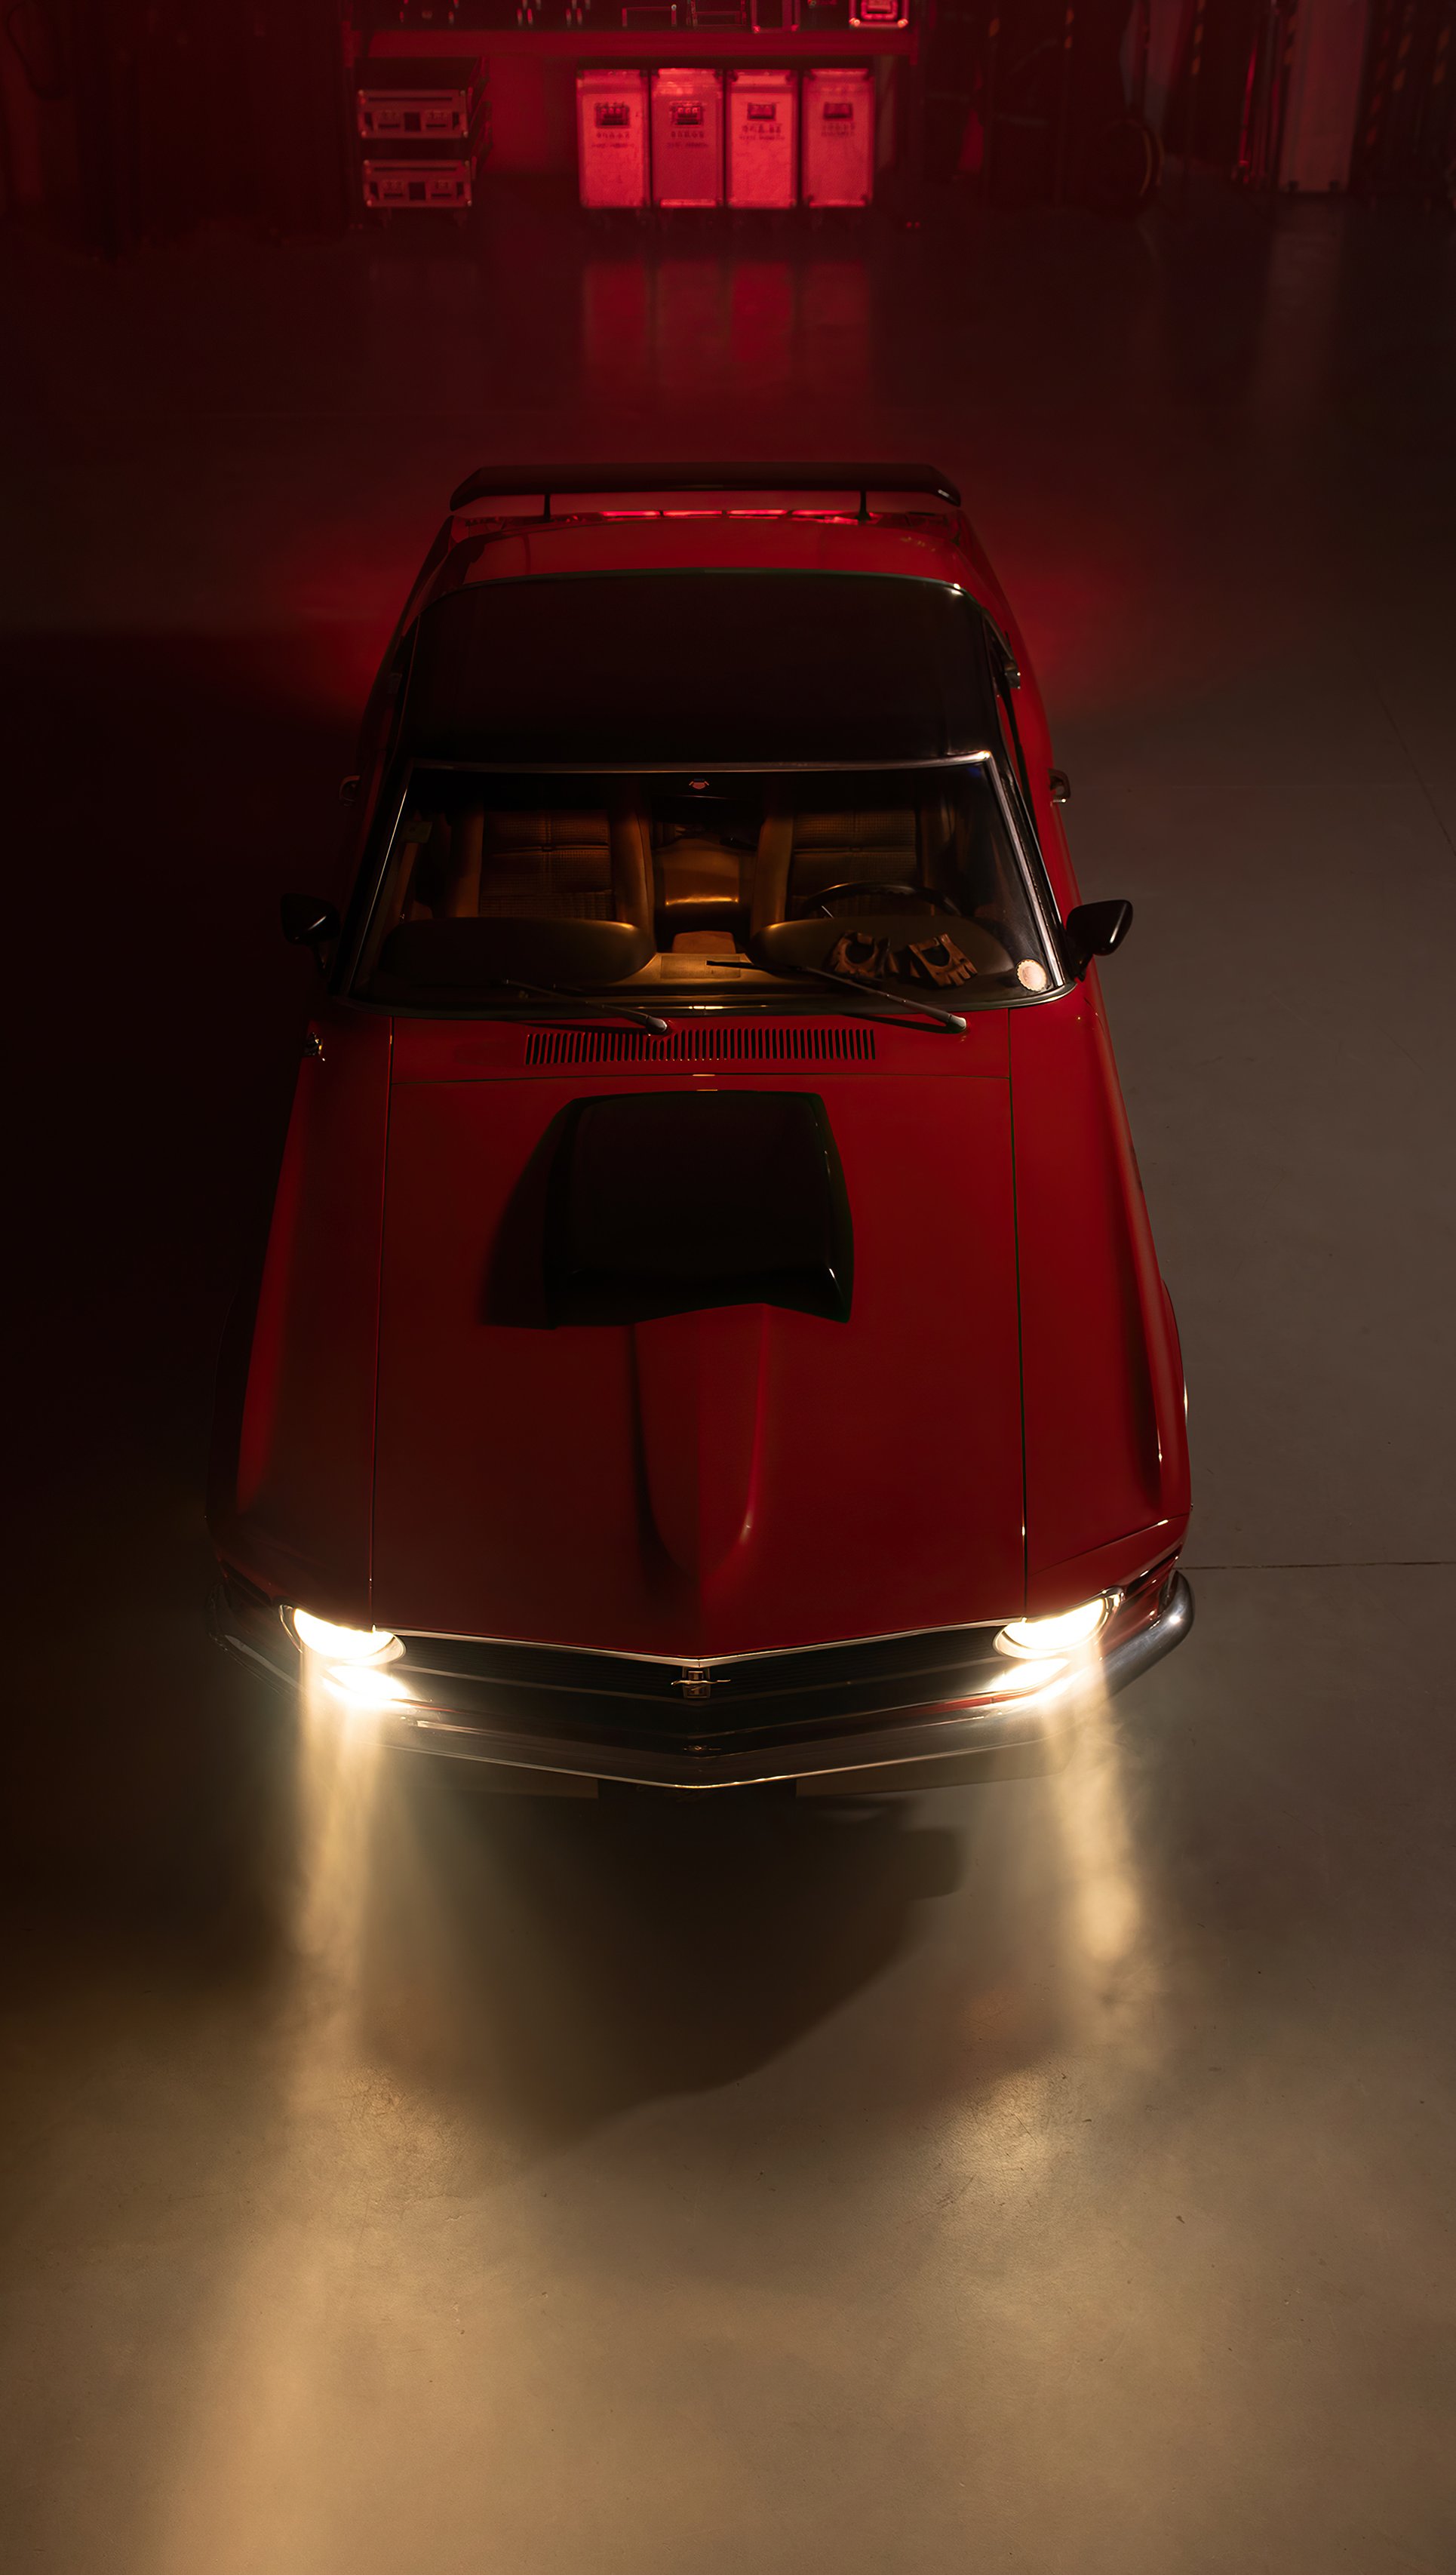 Ford Mustang Coupe 1970 Wallpaper 5k Ultra HD ID:8818